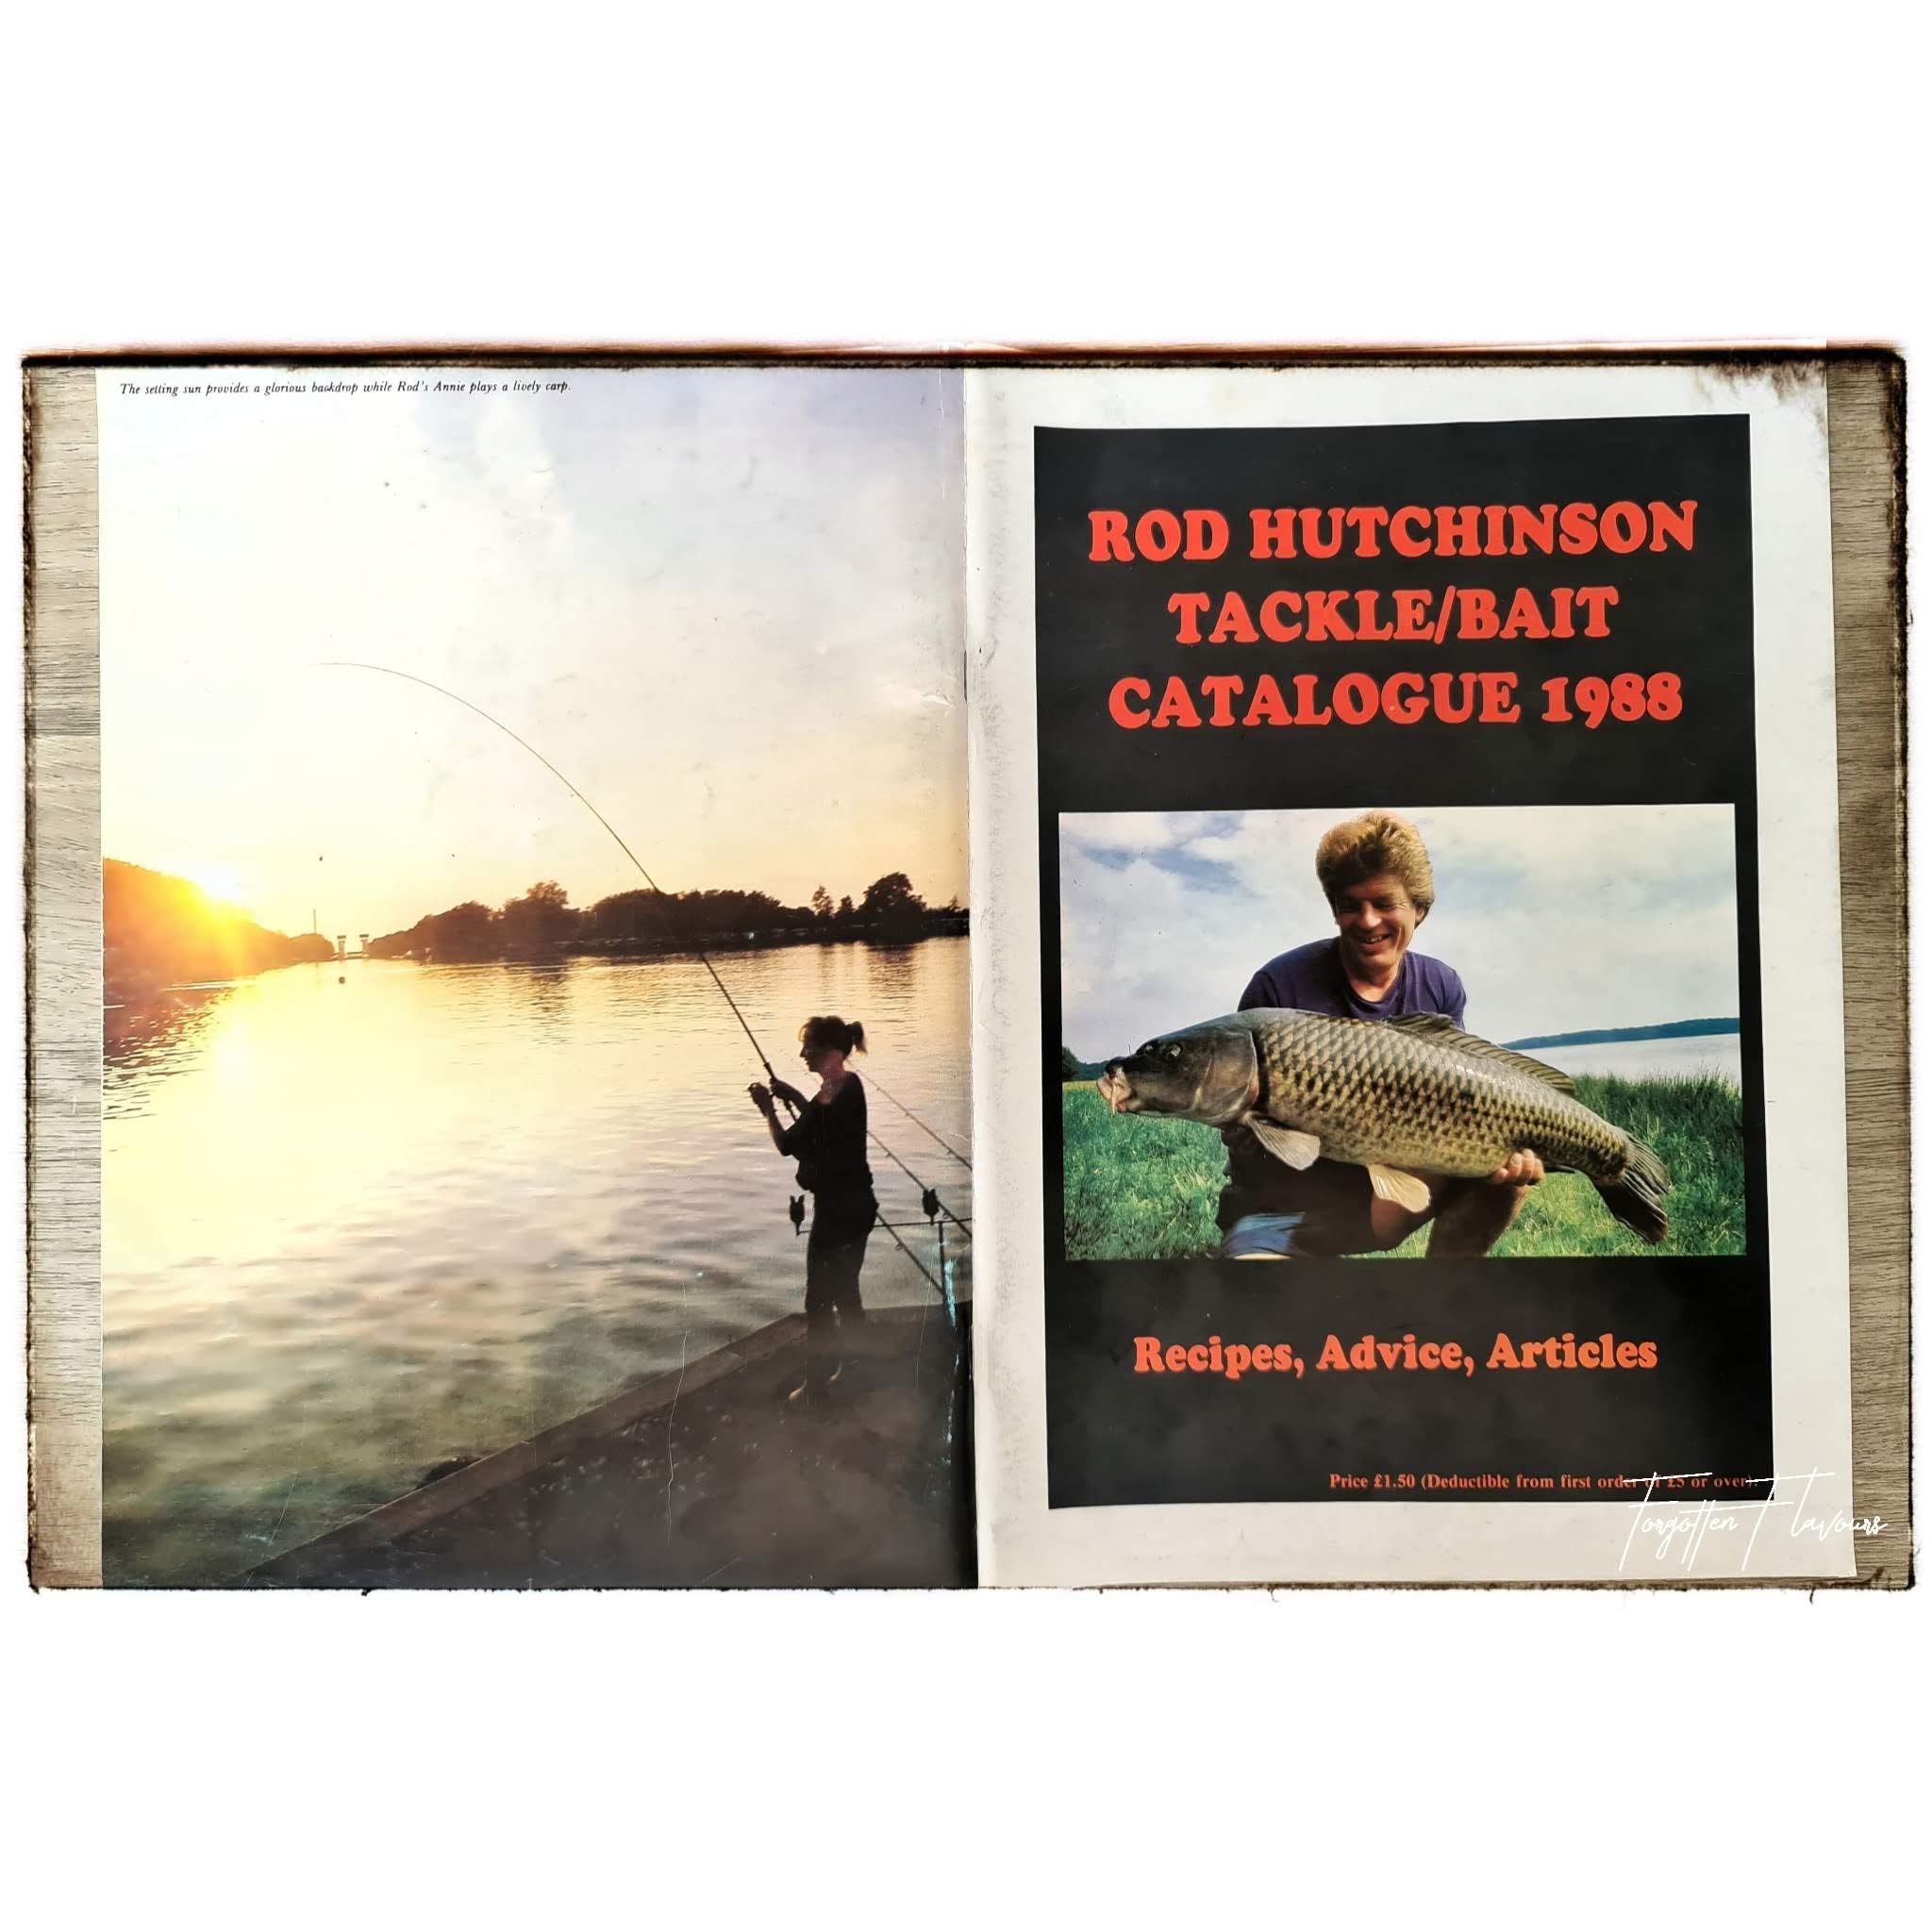 Rod Hutchinson tackle/bait catalogue 1988 – Forgotten Flavours & On Point